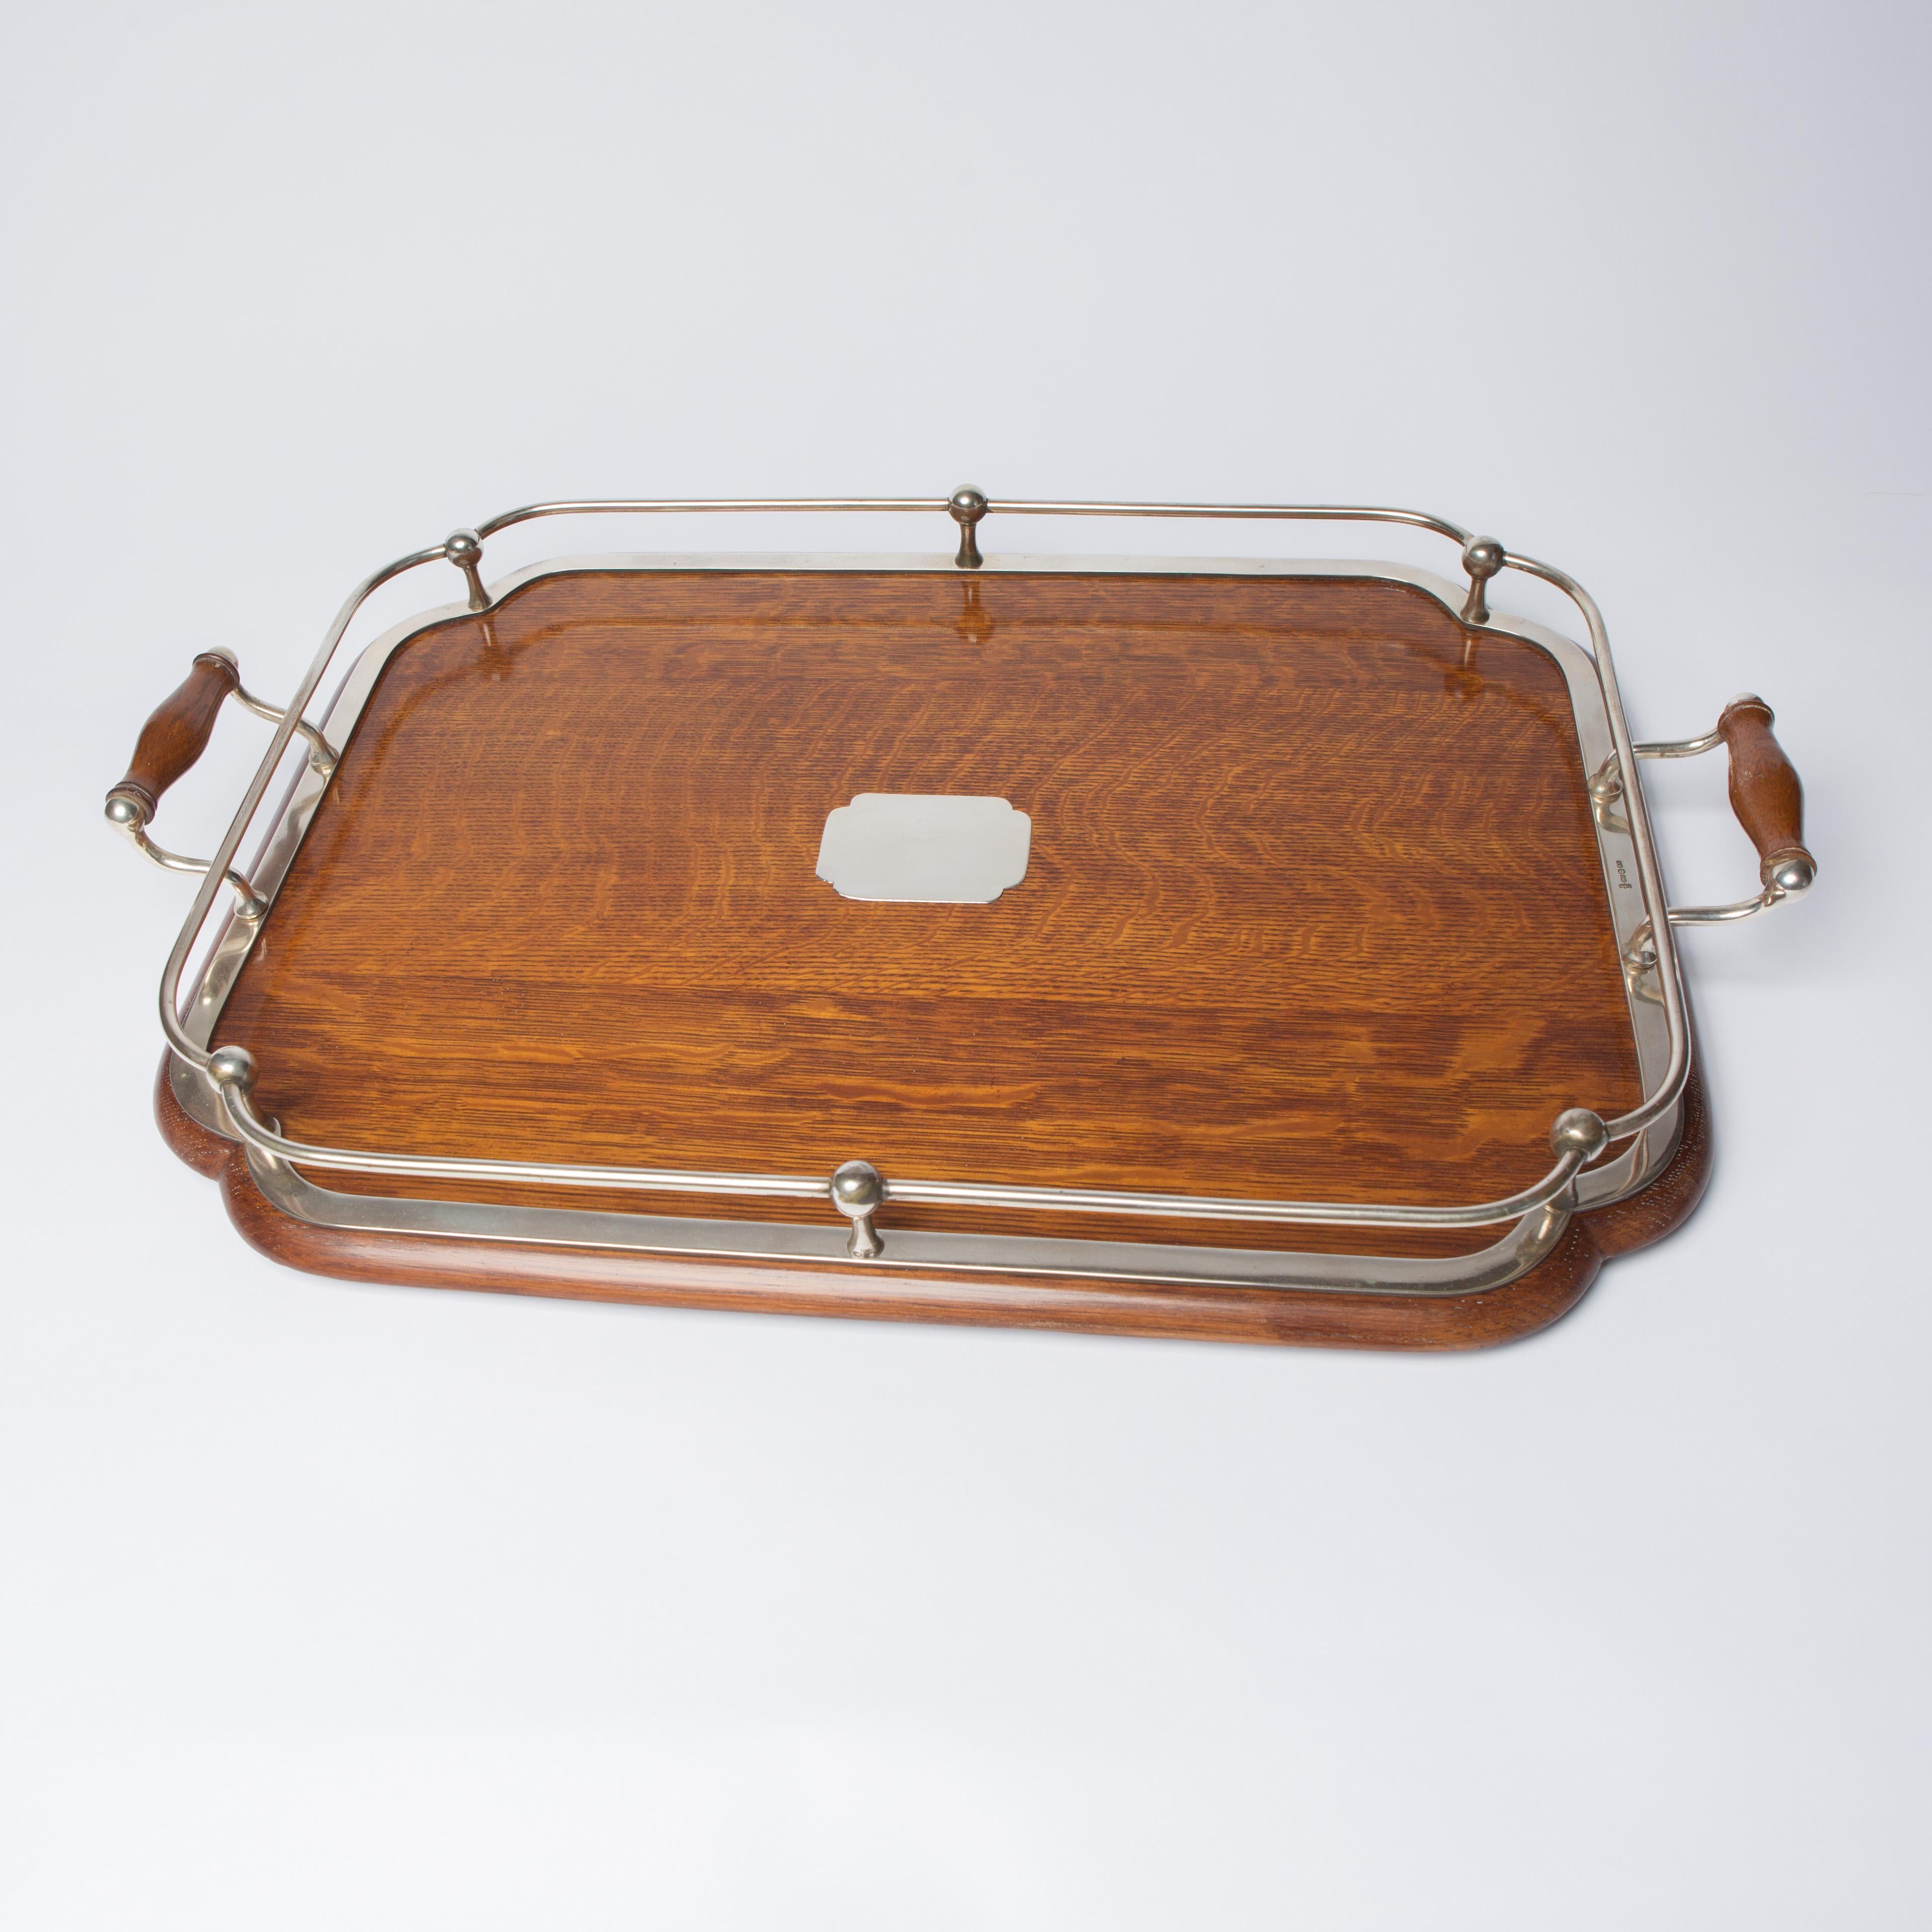 Very smart example of a 19th century oak and silver plated drinks tray. Curved wooden tray with curved corner detailing surround by decorative silver frame with silver and oak handles.